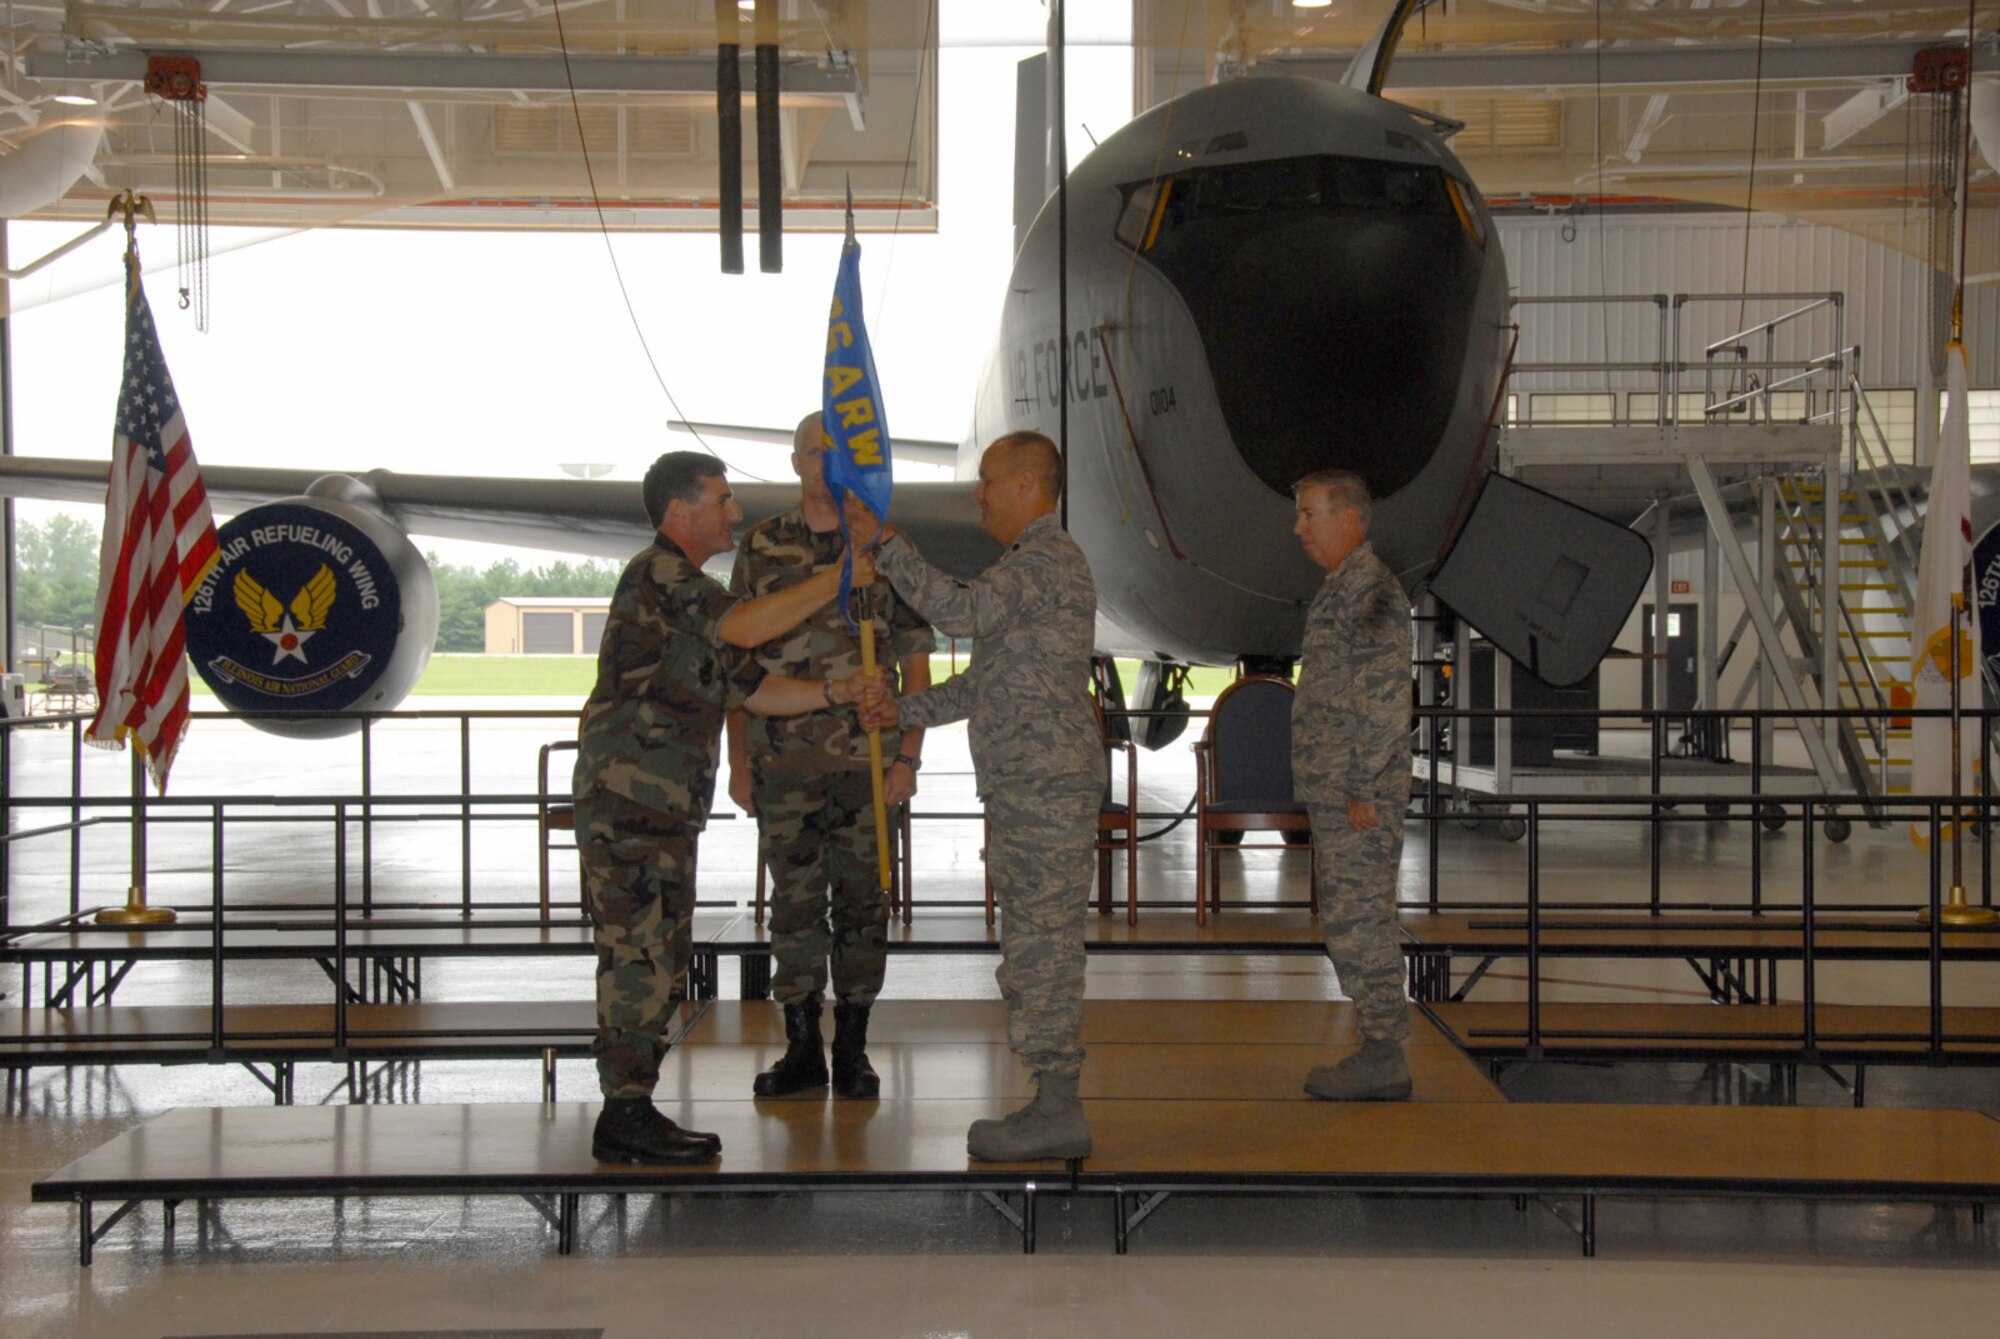 SCOTT AIR FORCE BASE, Ill. - Lt. Col. Rick Keasey accepts the guideon and command of the 126th Maintenance Group from Col. Peter Nezamis, commander of the 126th Air Refueling Wing, as Chief Master Sgt. Mark Berens, the 126 MXG quality assurance chief ,looks on.  (U.S. Air Force photo by Master Sgt. Franklin Hayes)